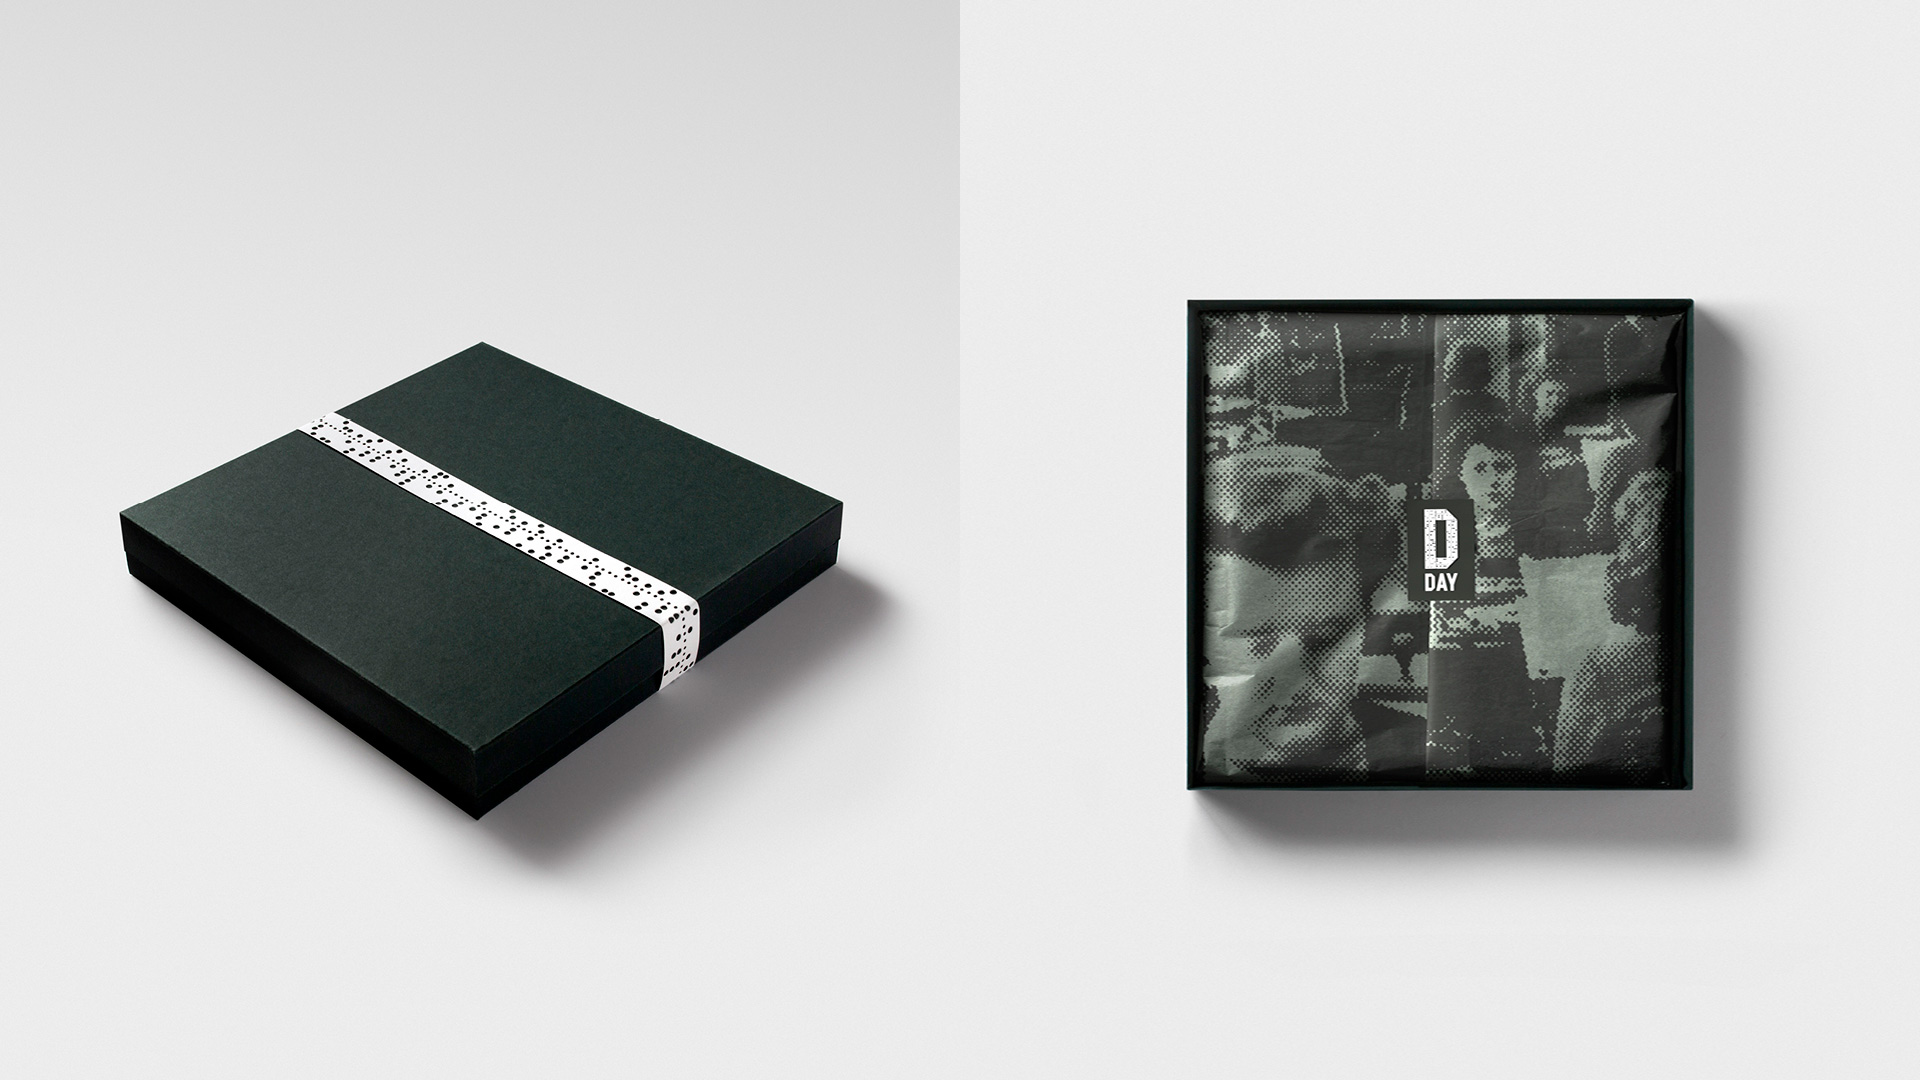 New Logo and Identity for D-Day Exhibit by Rose